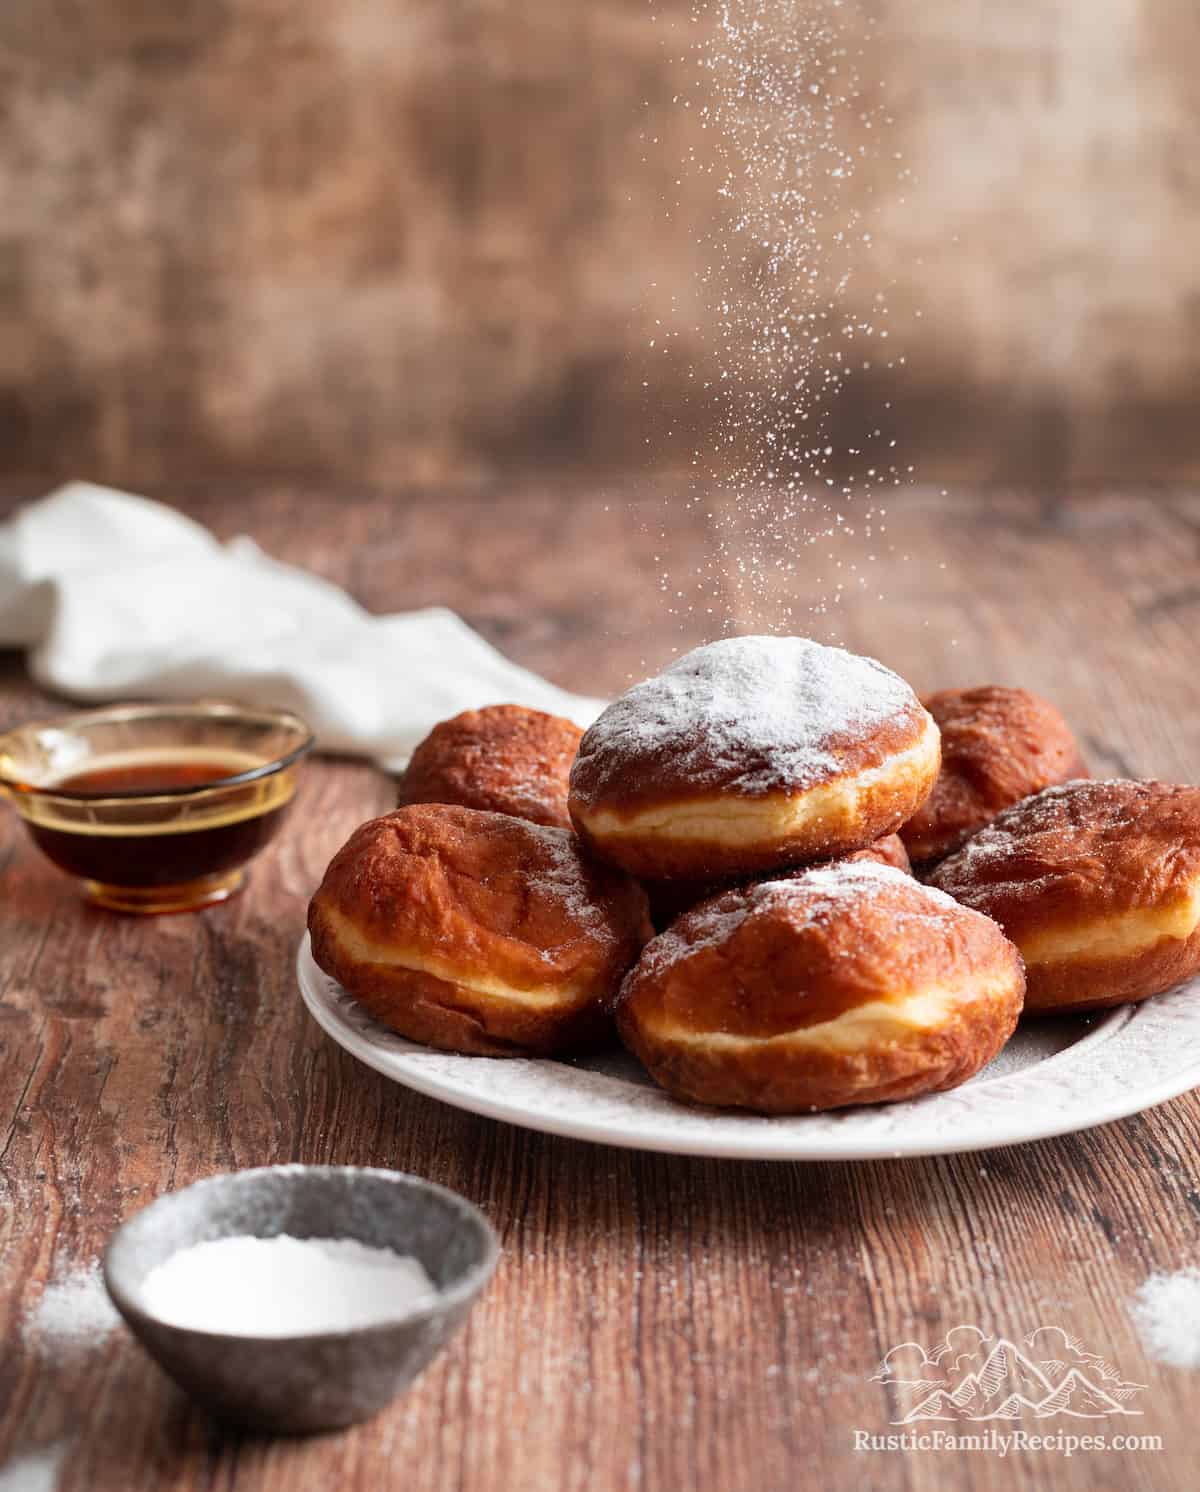 A plate full of Polish donuts topped with powdered sugar